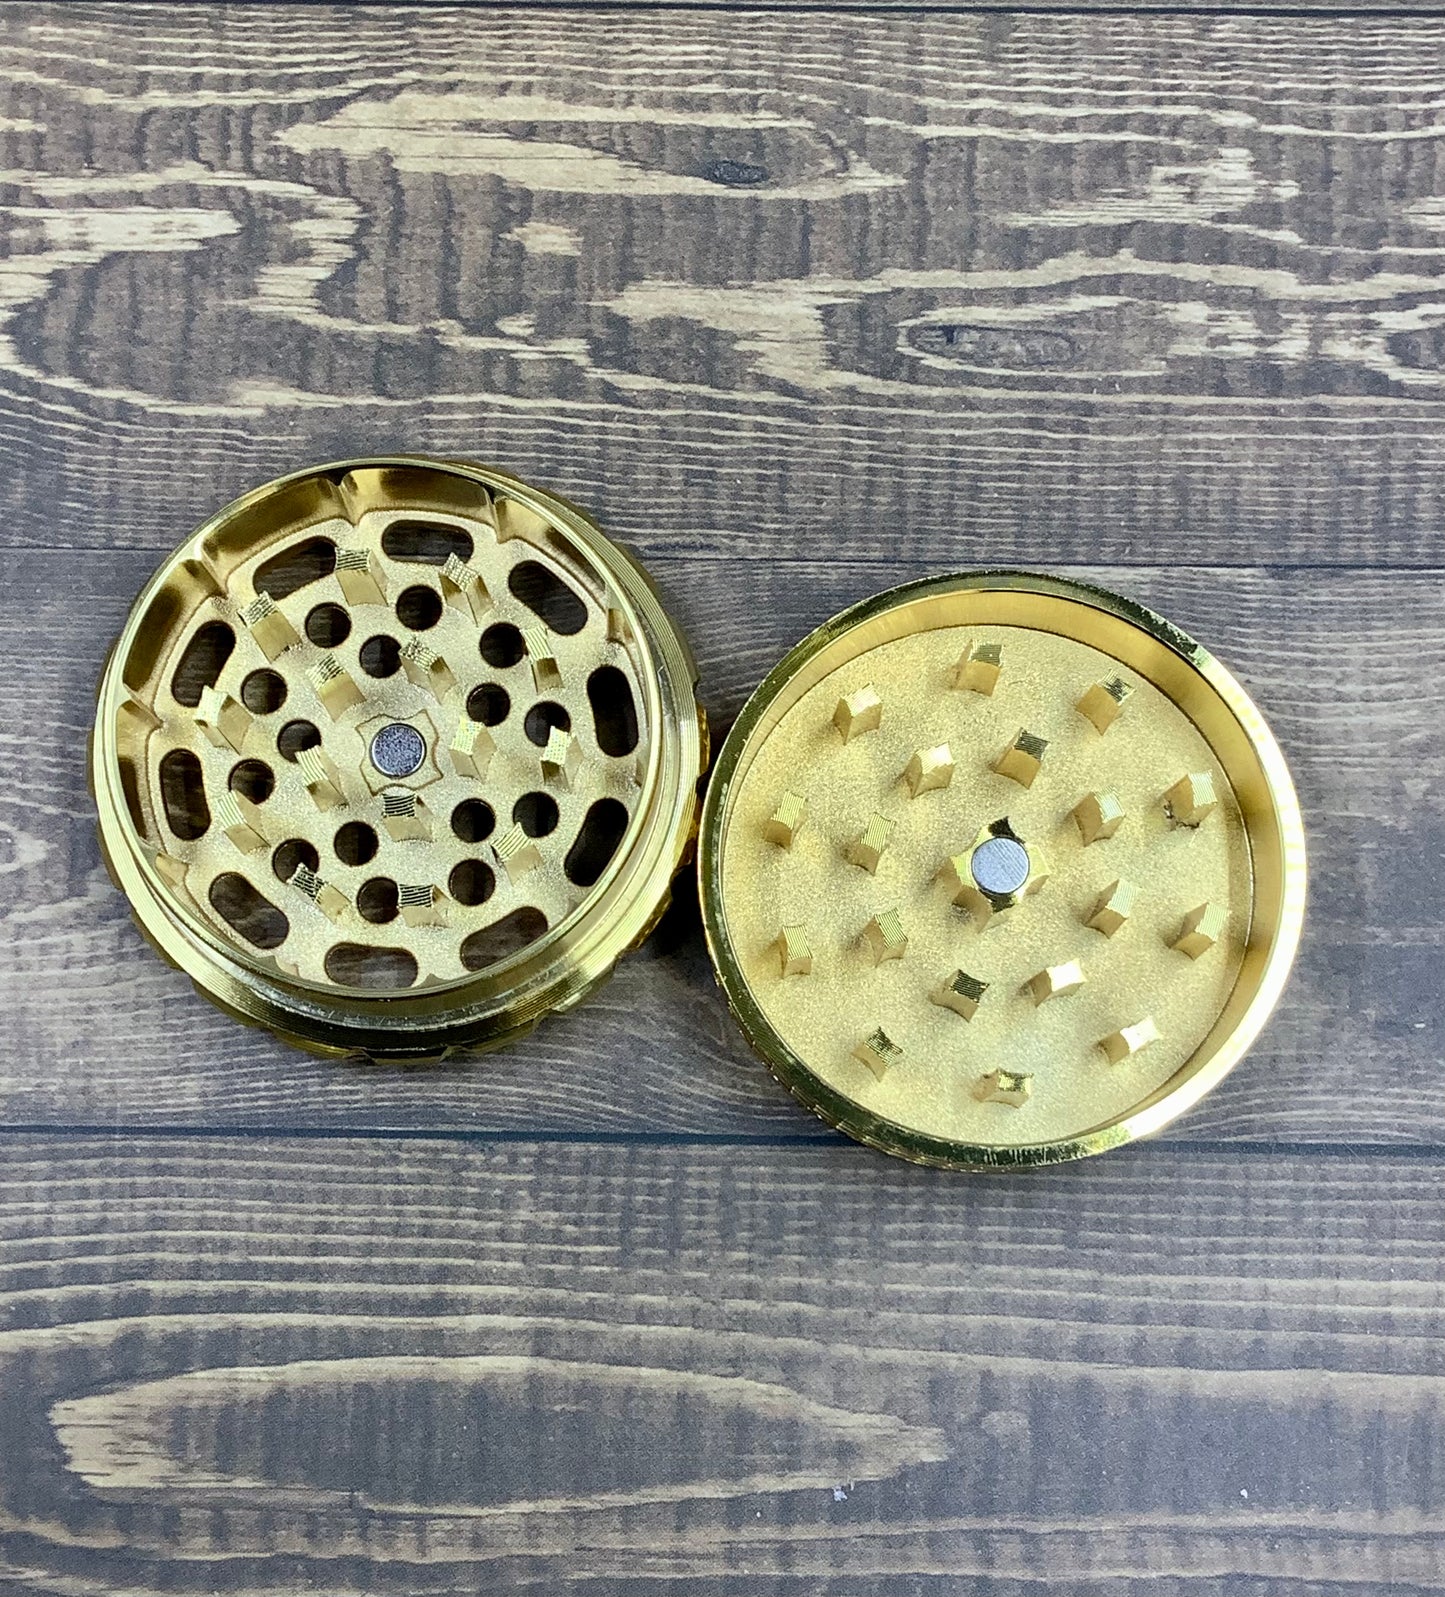 2 Inch Gold Leaf W/ Rasta Color Metal Grinder yoga smokes yoga studio, delivery, delivery near me, yoga smokes smoke shop, find smoke shop, head shop near me, yoga studio, headshop, head shop, local smoke shop, psl, psl smoke shop, smoke shop, smokeshop, yoga, yoga studio, dispensary, local dispensary, smokeshop near me, port saint lucie, florida, port st lucie, lounge, life, highlife, love, stoned, highsociety. Yoga Smokes